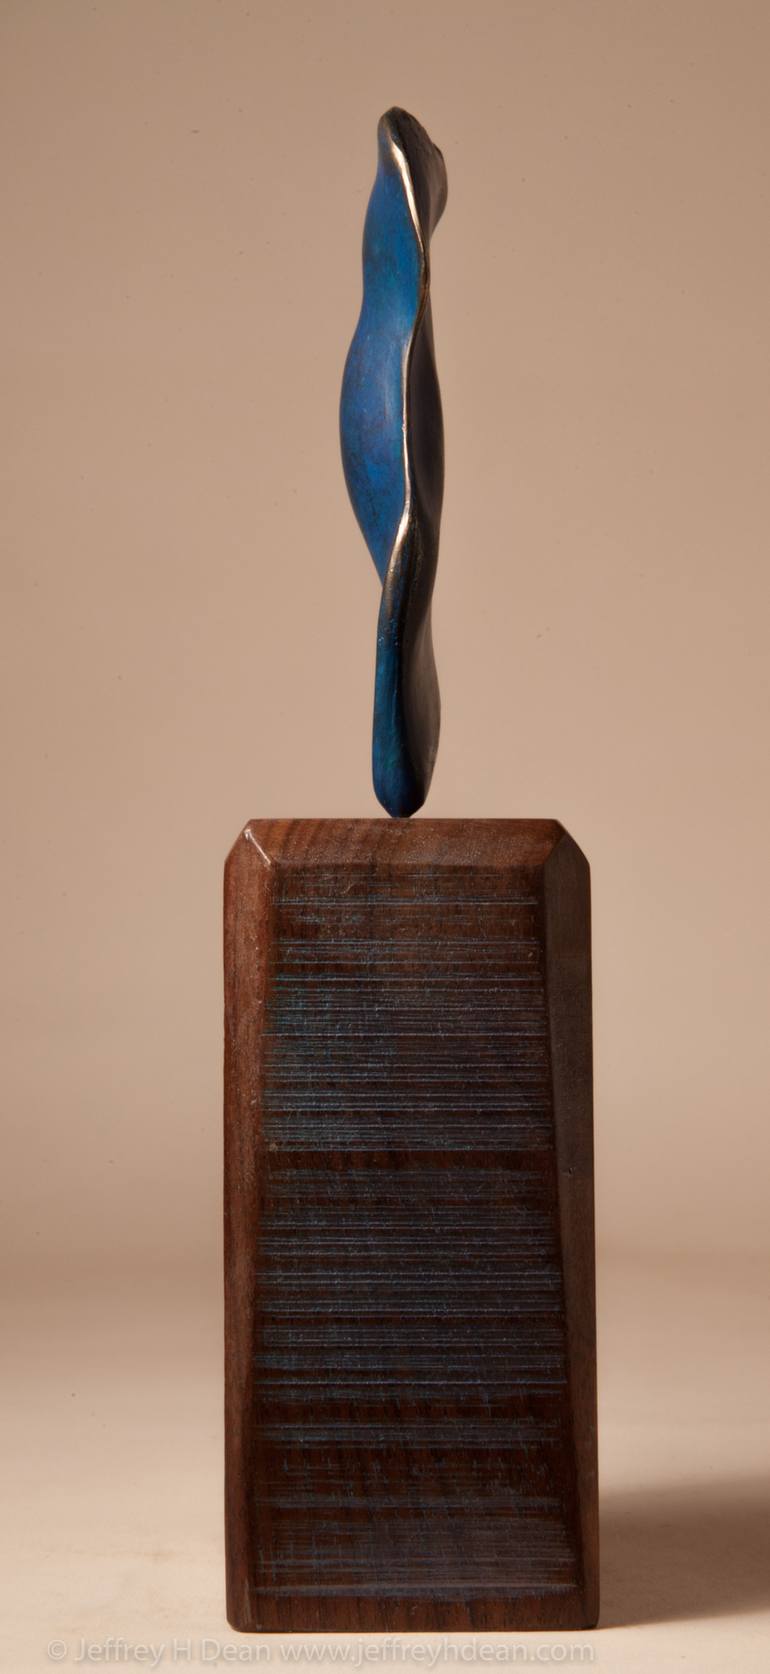 Original Abstract People Sculpture by Jeff and Ranja Dean